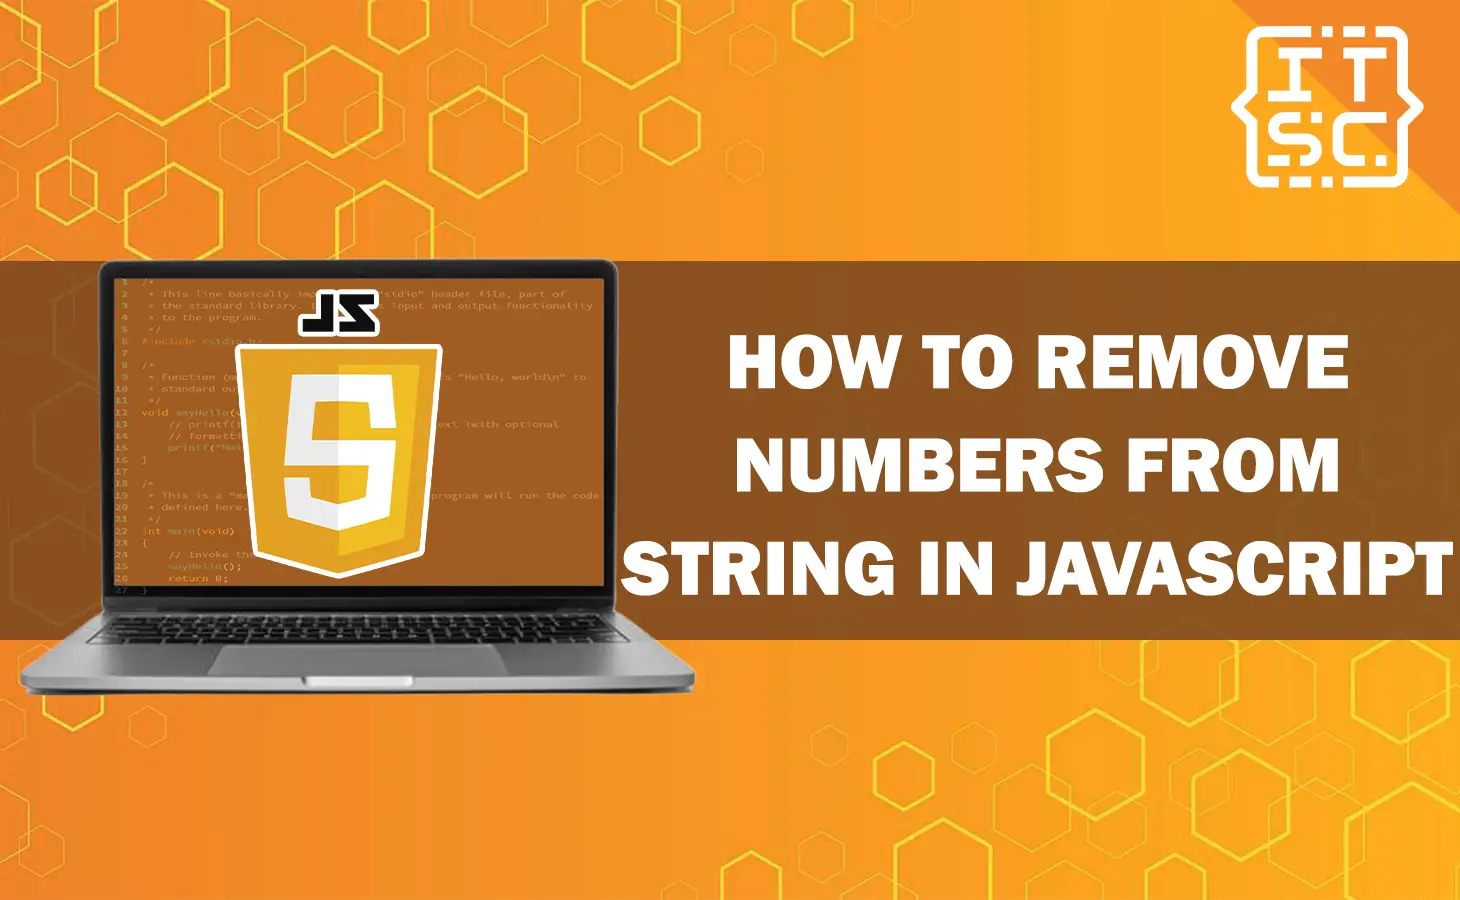 How to remove numbers from string in JavaScript